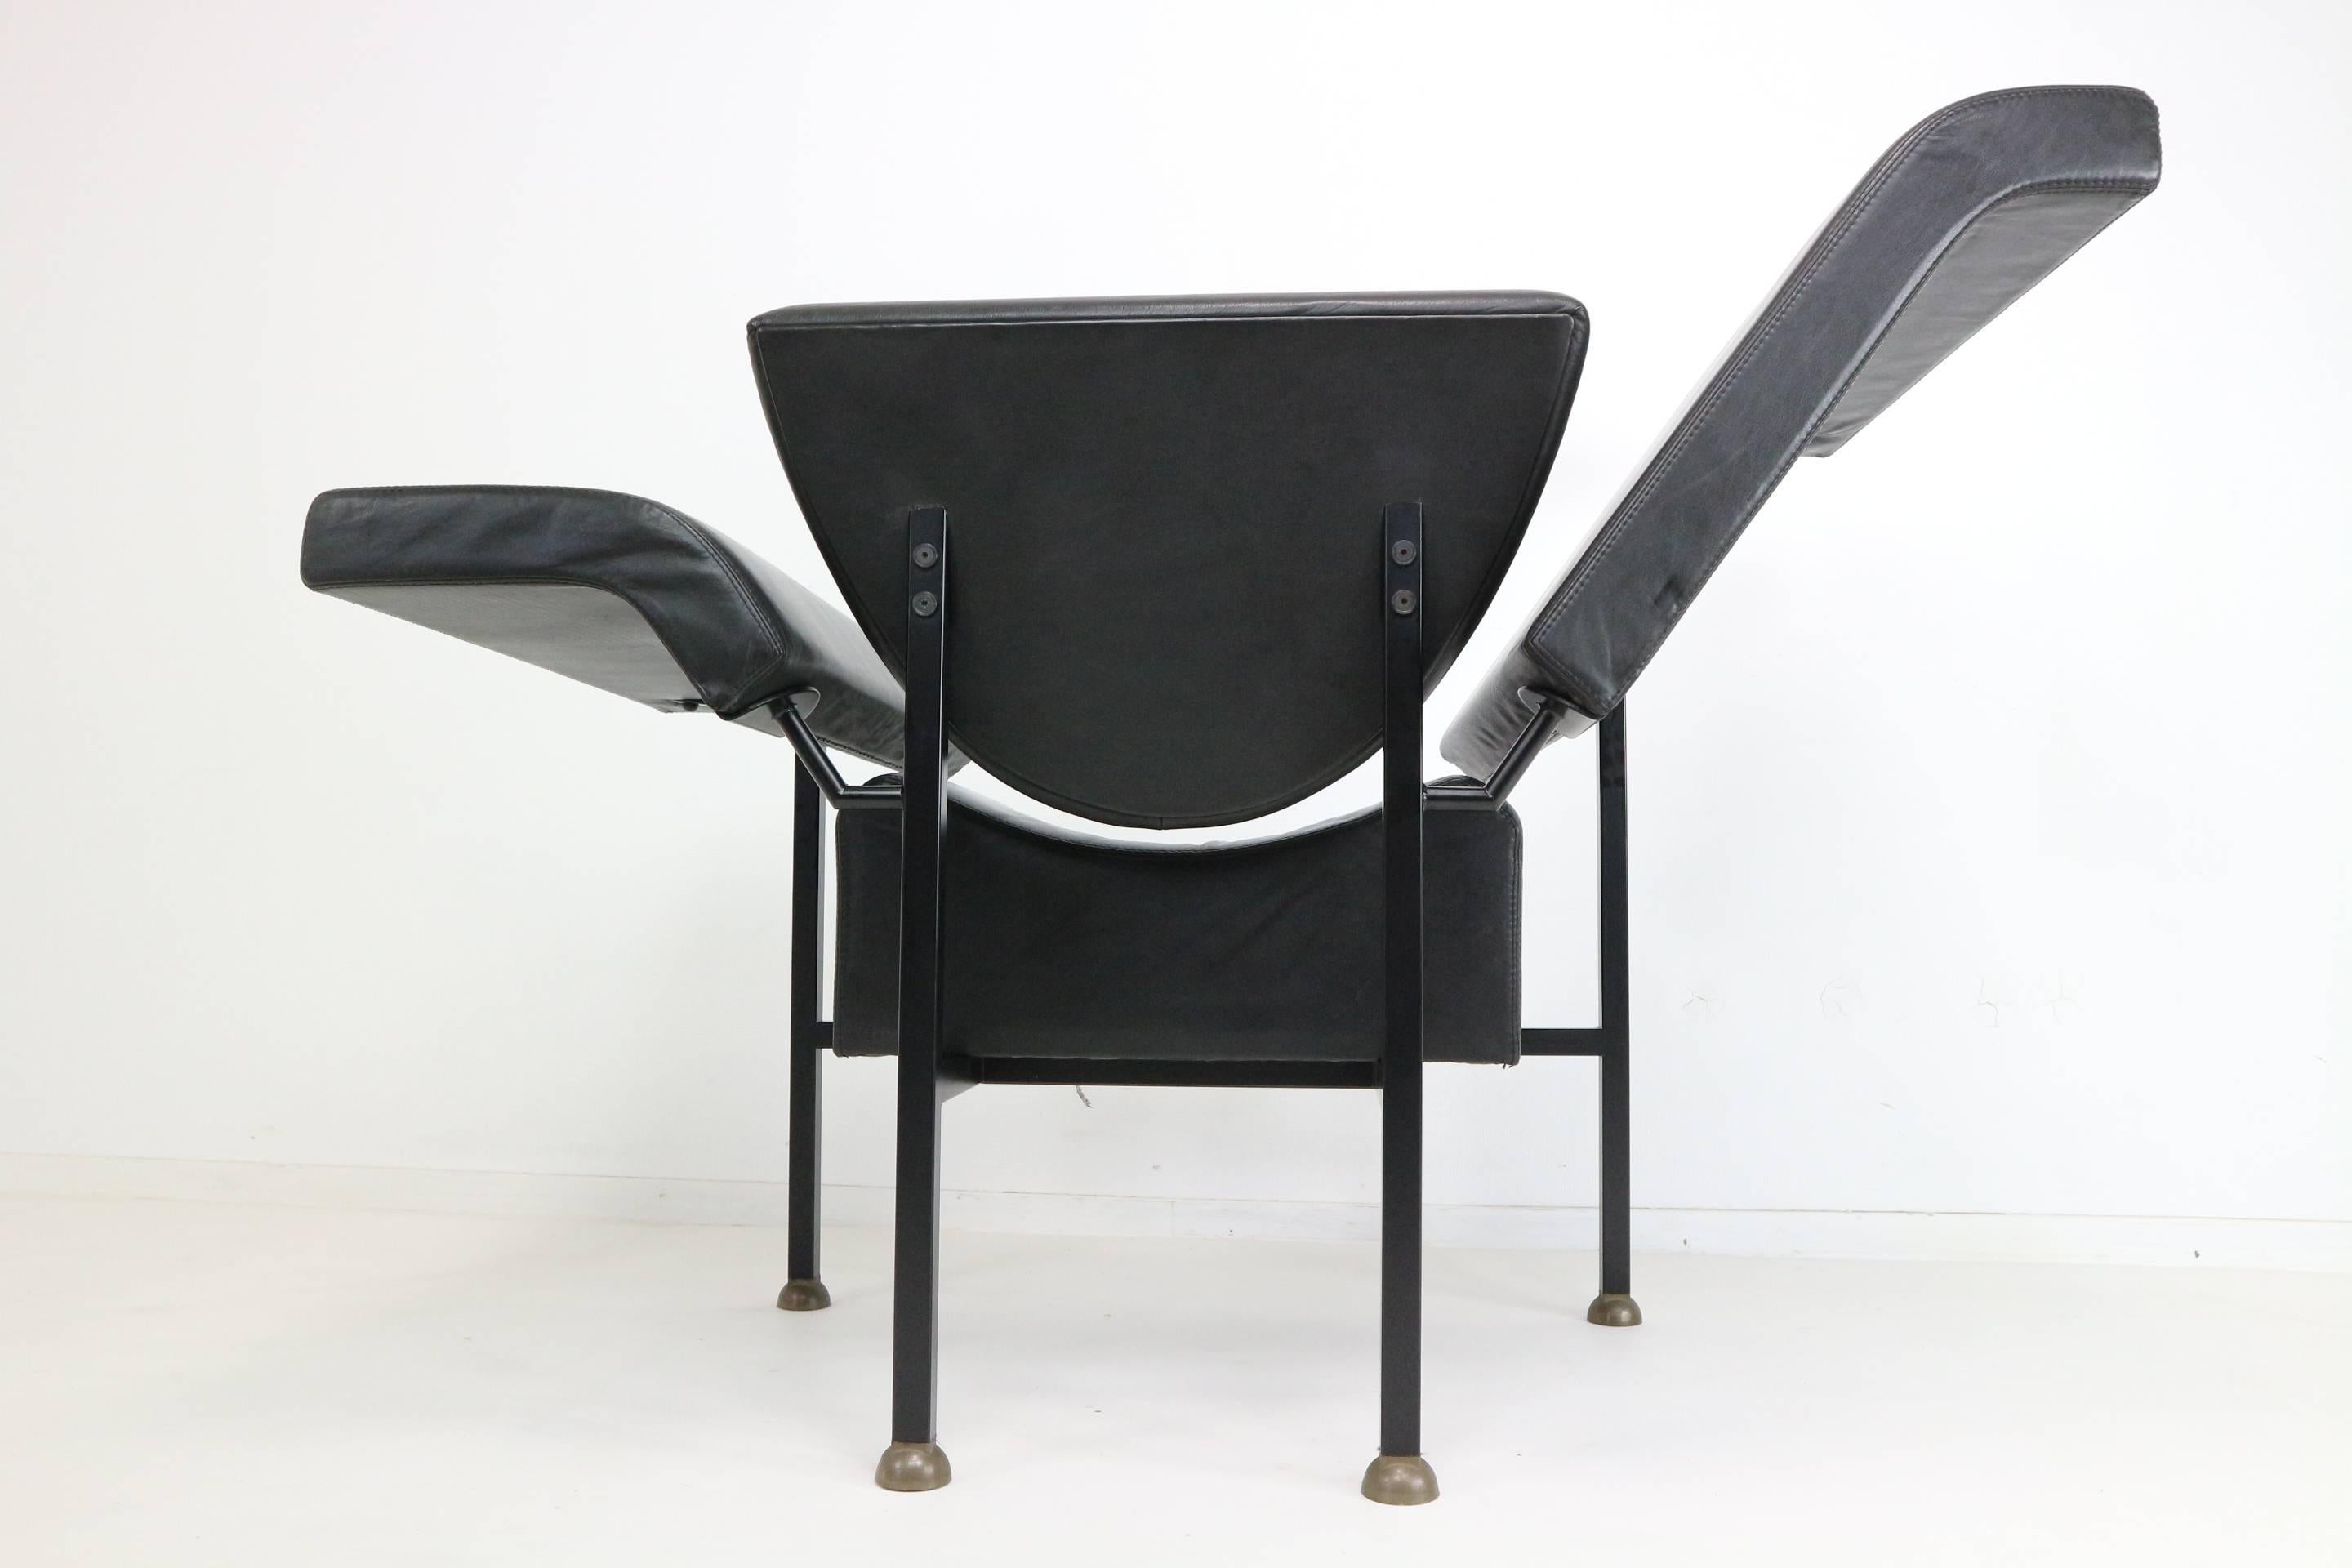 Metal Rob Eckhardt 'Greetings from Holland' Chaise Leather Longue, 1983